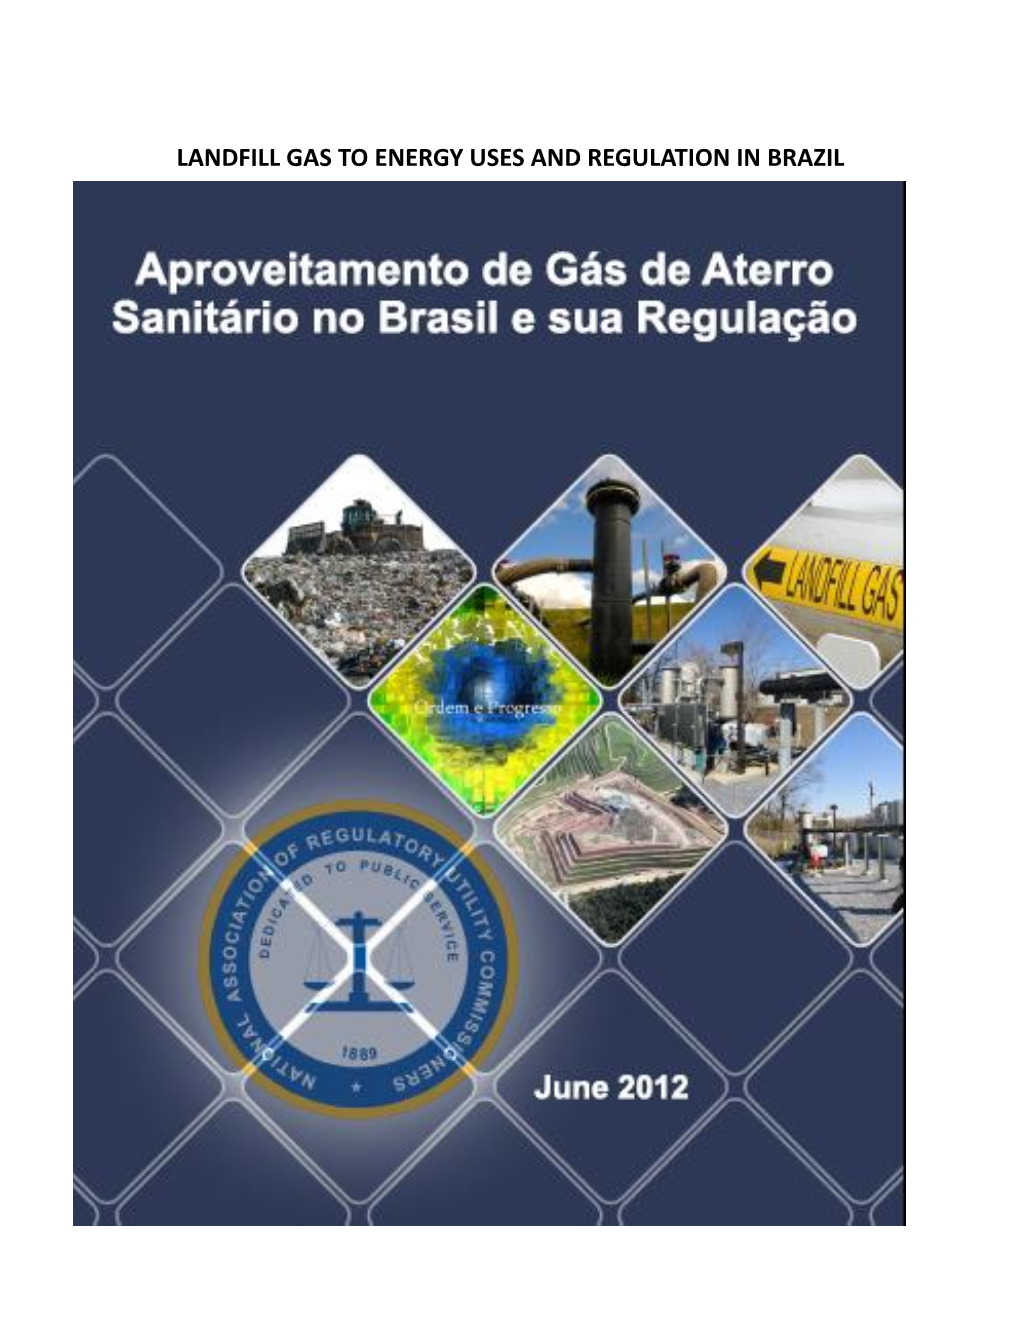 Landfill Gas to Energy Uses and Regulation in Brazil